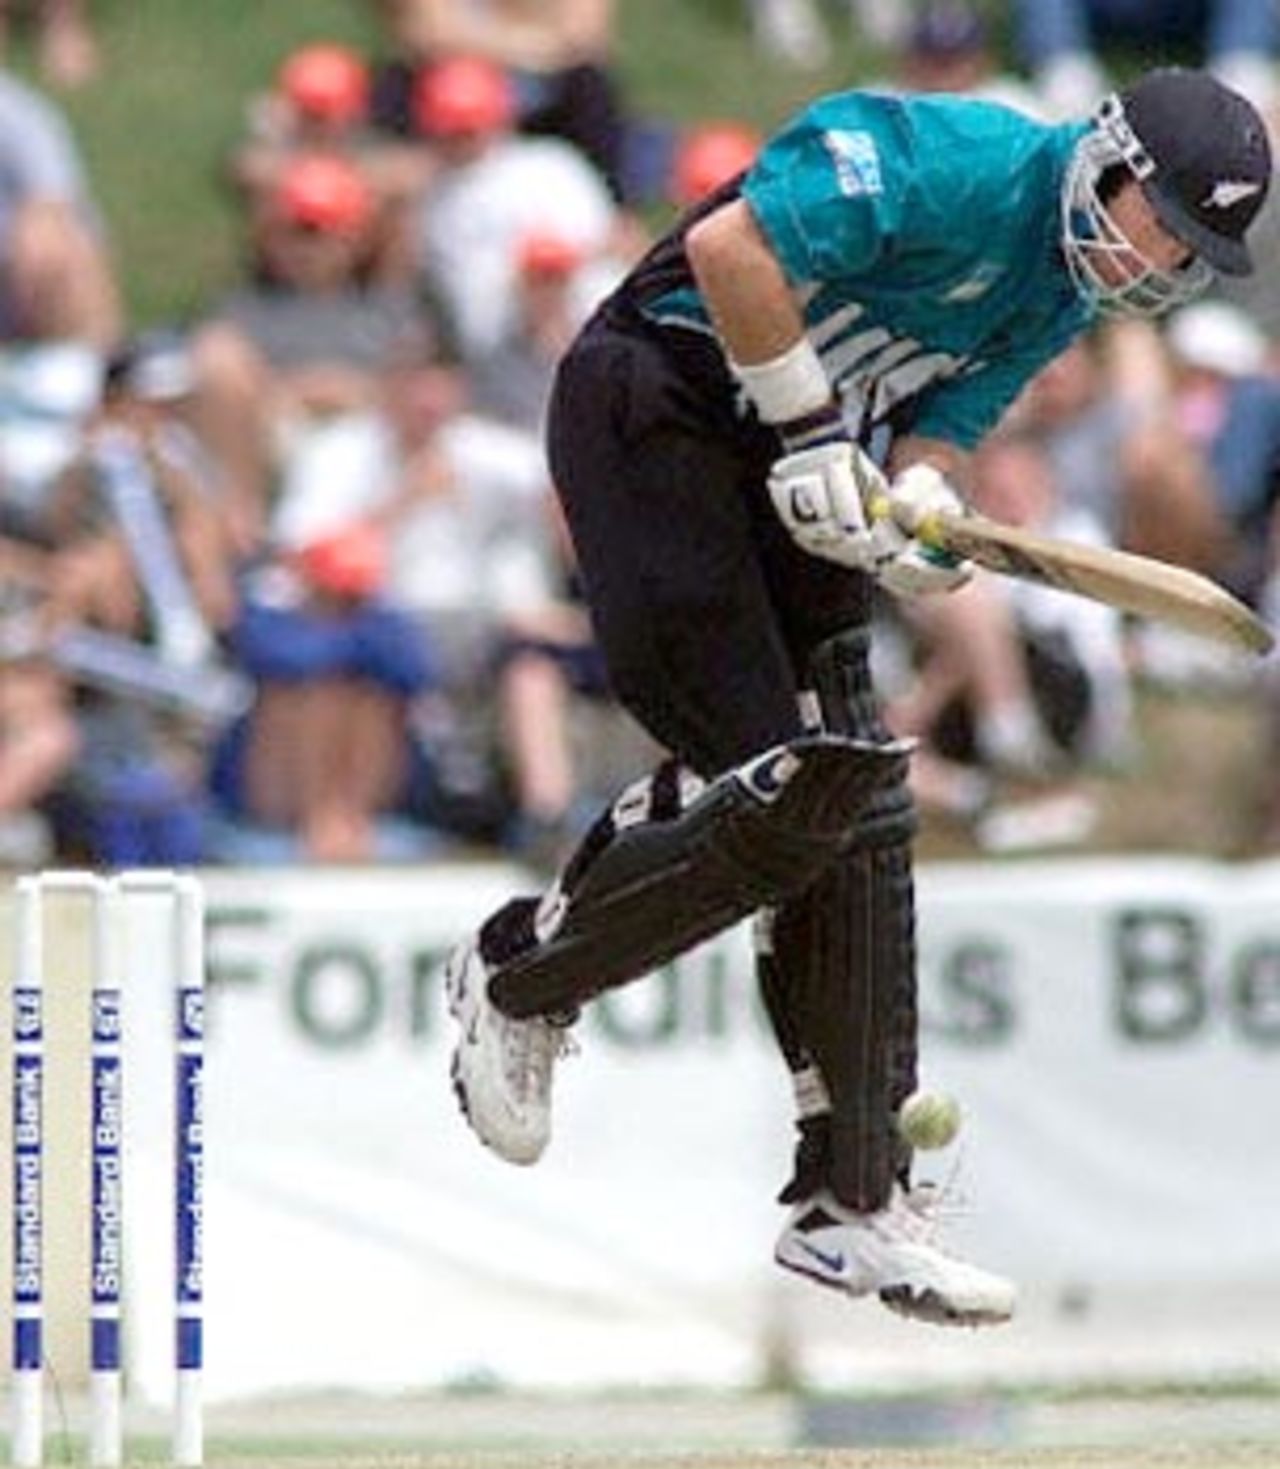 Roger Twose defends against a short pitched delivery, New Zealand in South Africa 2000/01, 2nd One-Day International, South Africa v New Zealand, Willowmoore Park, Benoni, 22 October 2000.